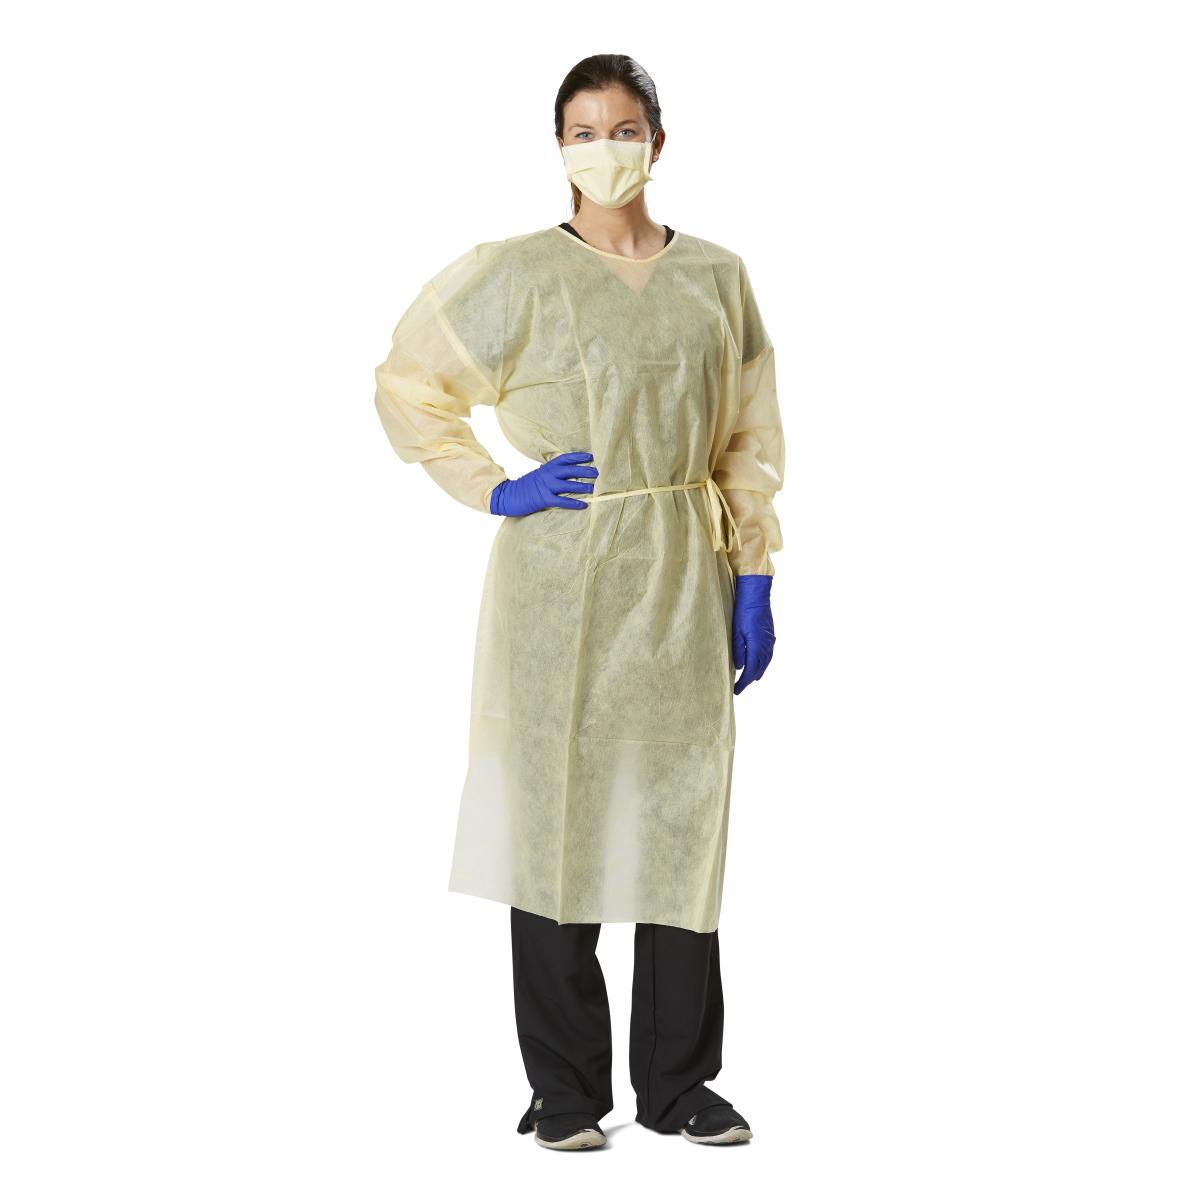 AAMI Level 1 Isolation Gown, Thumb Loop, L